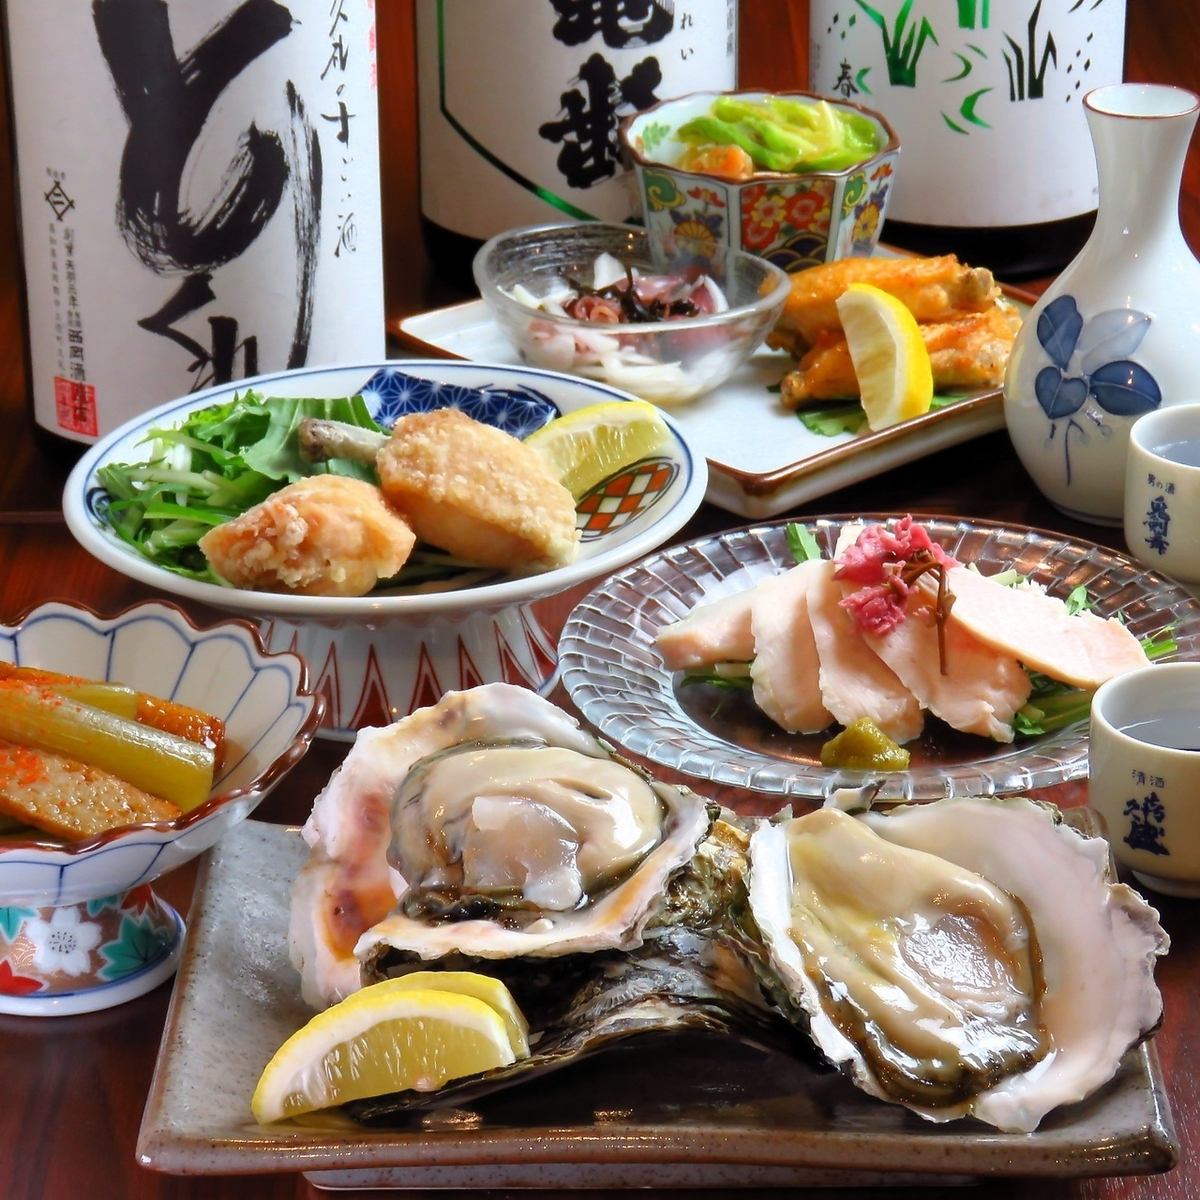 An oyster restaurant that pursues "delicious" and "safe" - Enjoy seasonal oysters with seasonal side dishes and sake